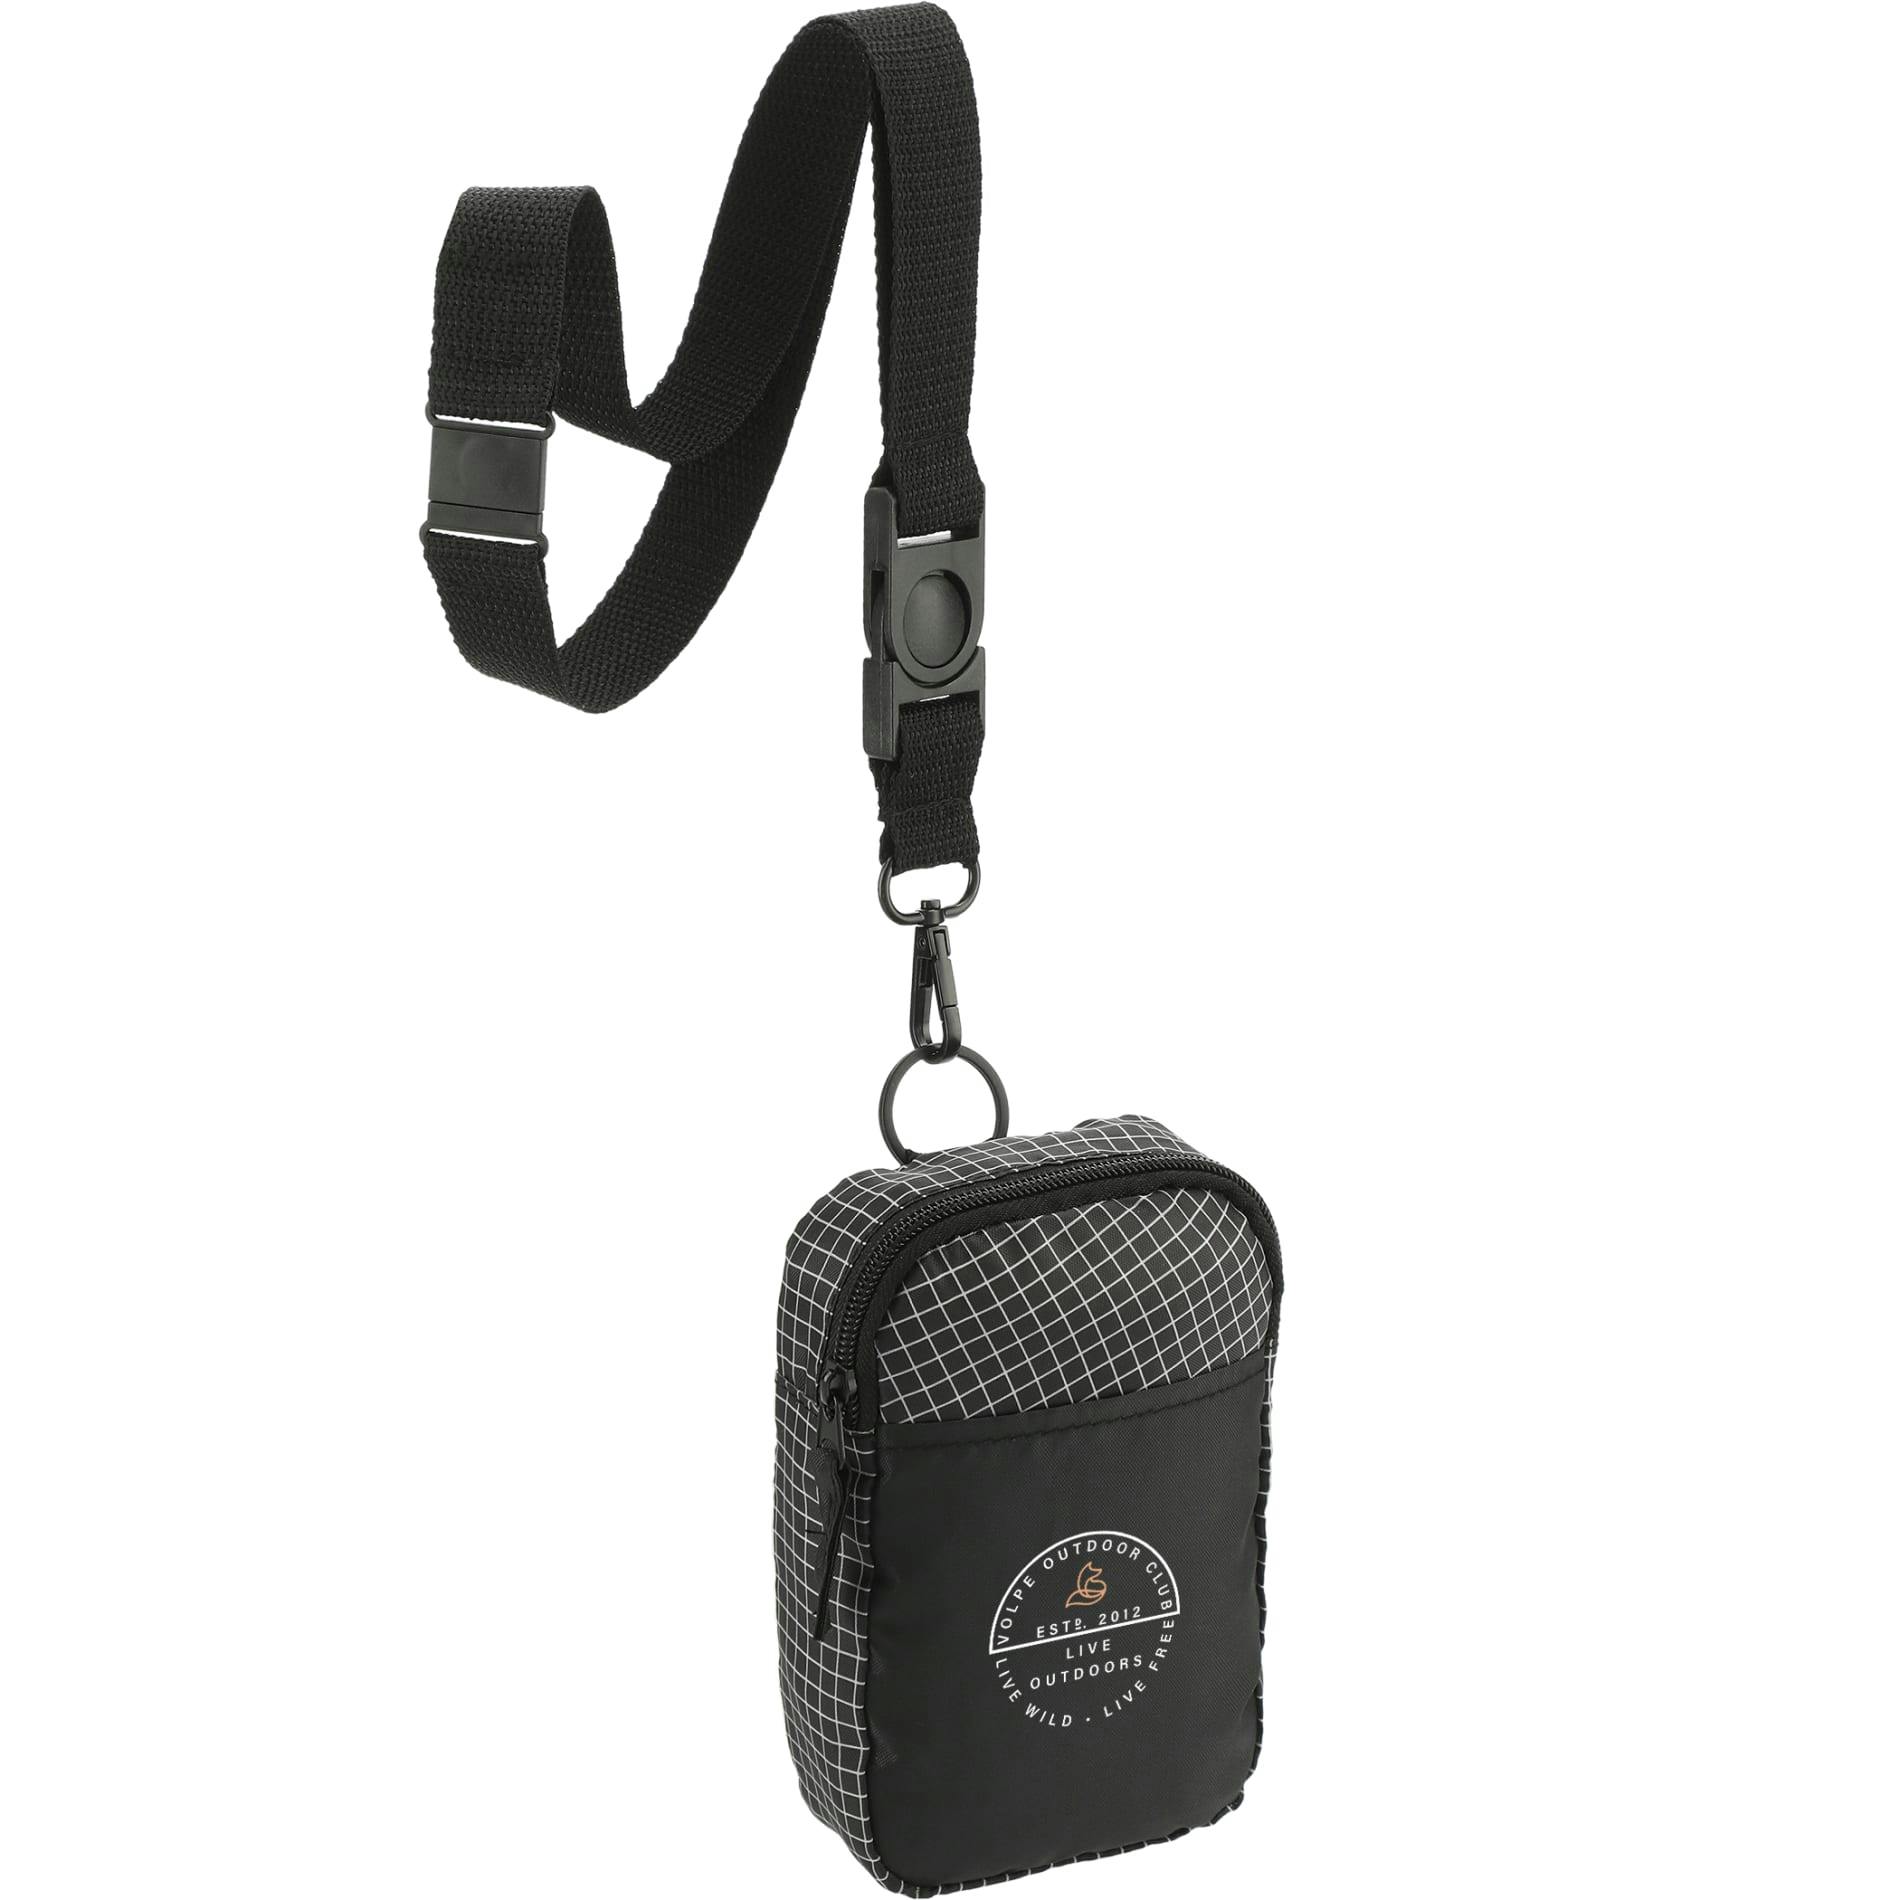 Grid Lanyard Phone Pouch - additional Image 1